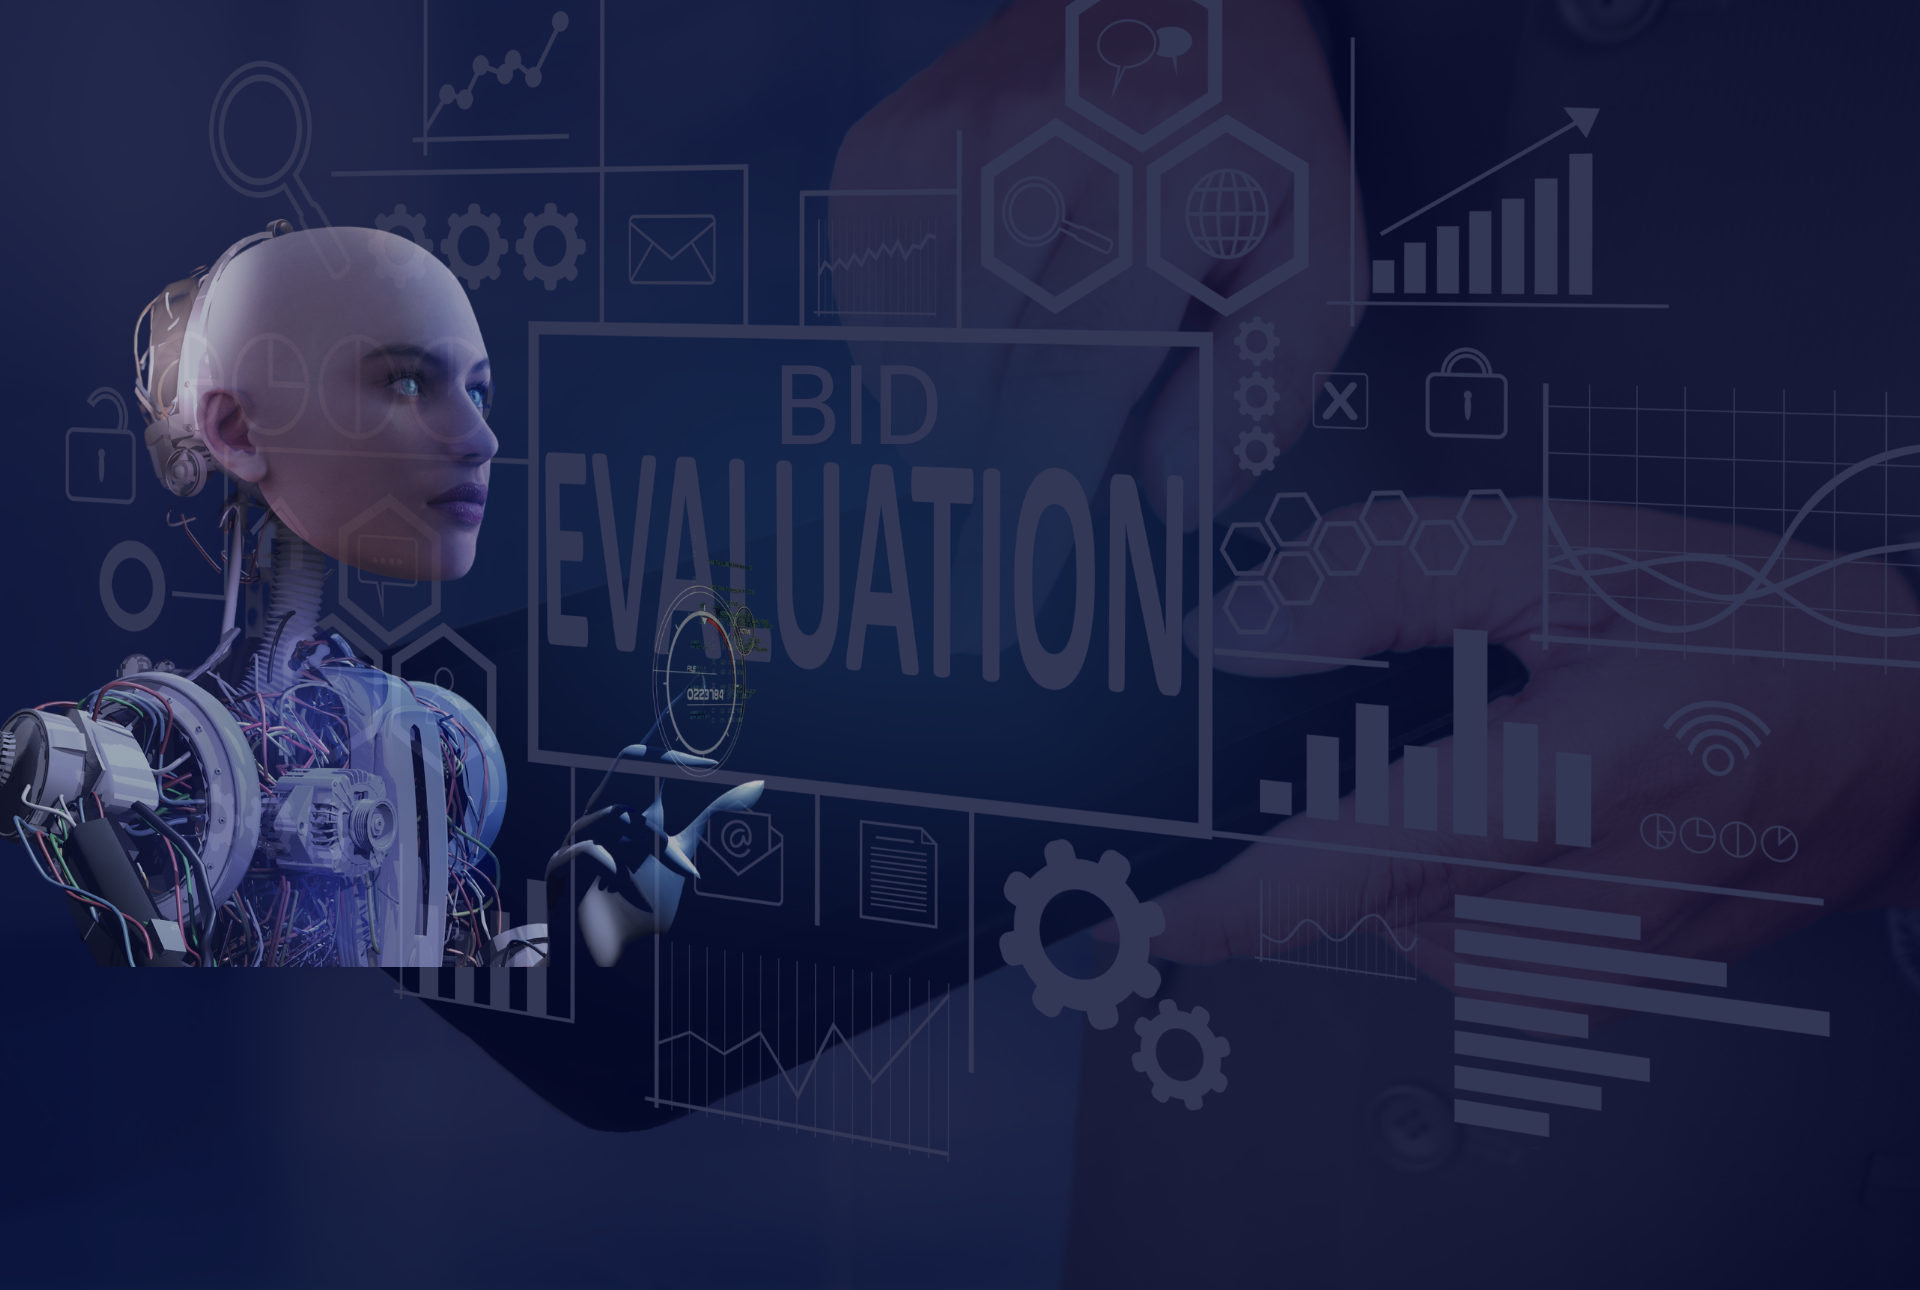 Read full post: Bid Evaluation - An AI Approach: How AI Can Streamline and Improve the Accuracy of Bid Evaluations